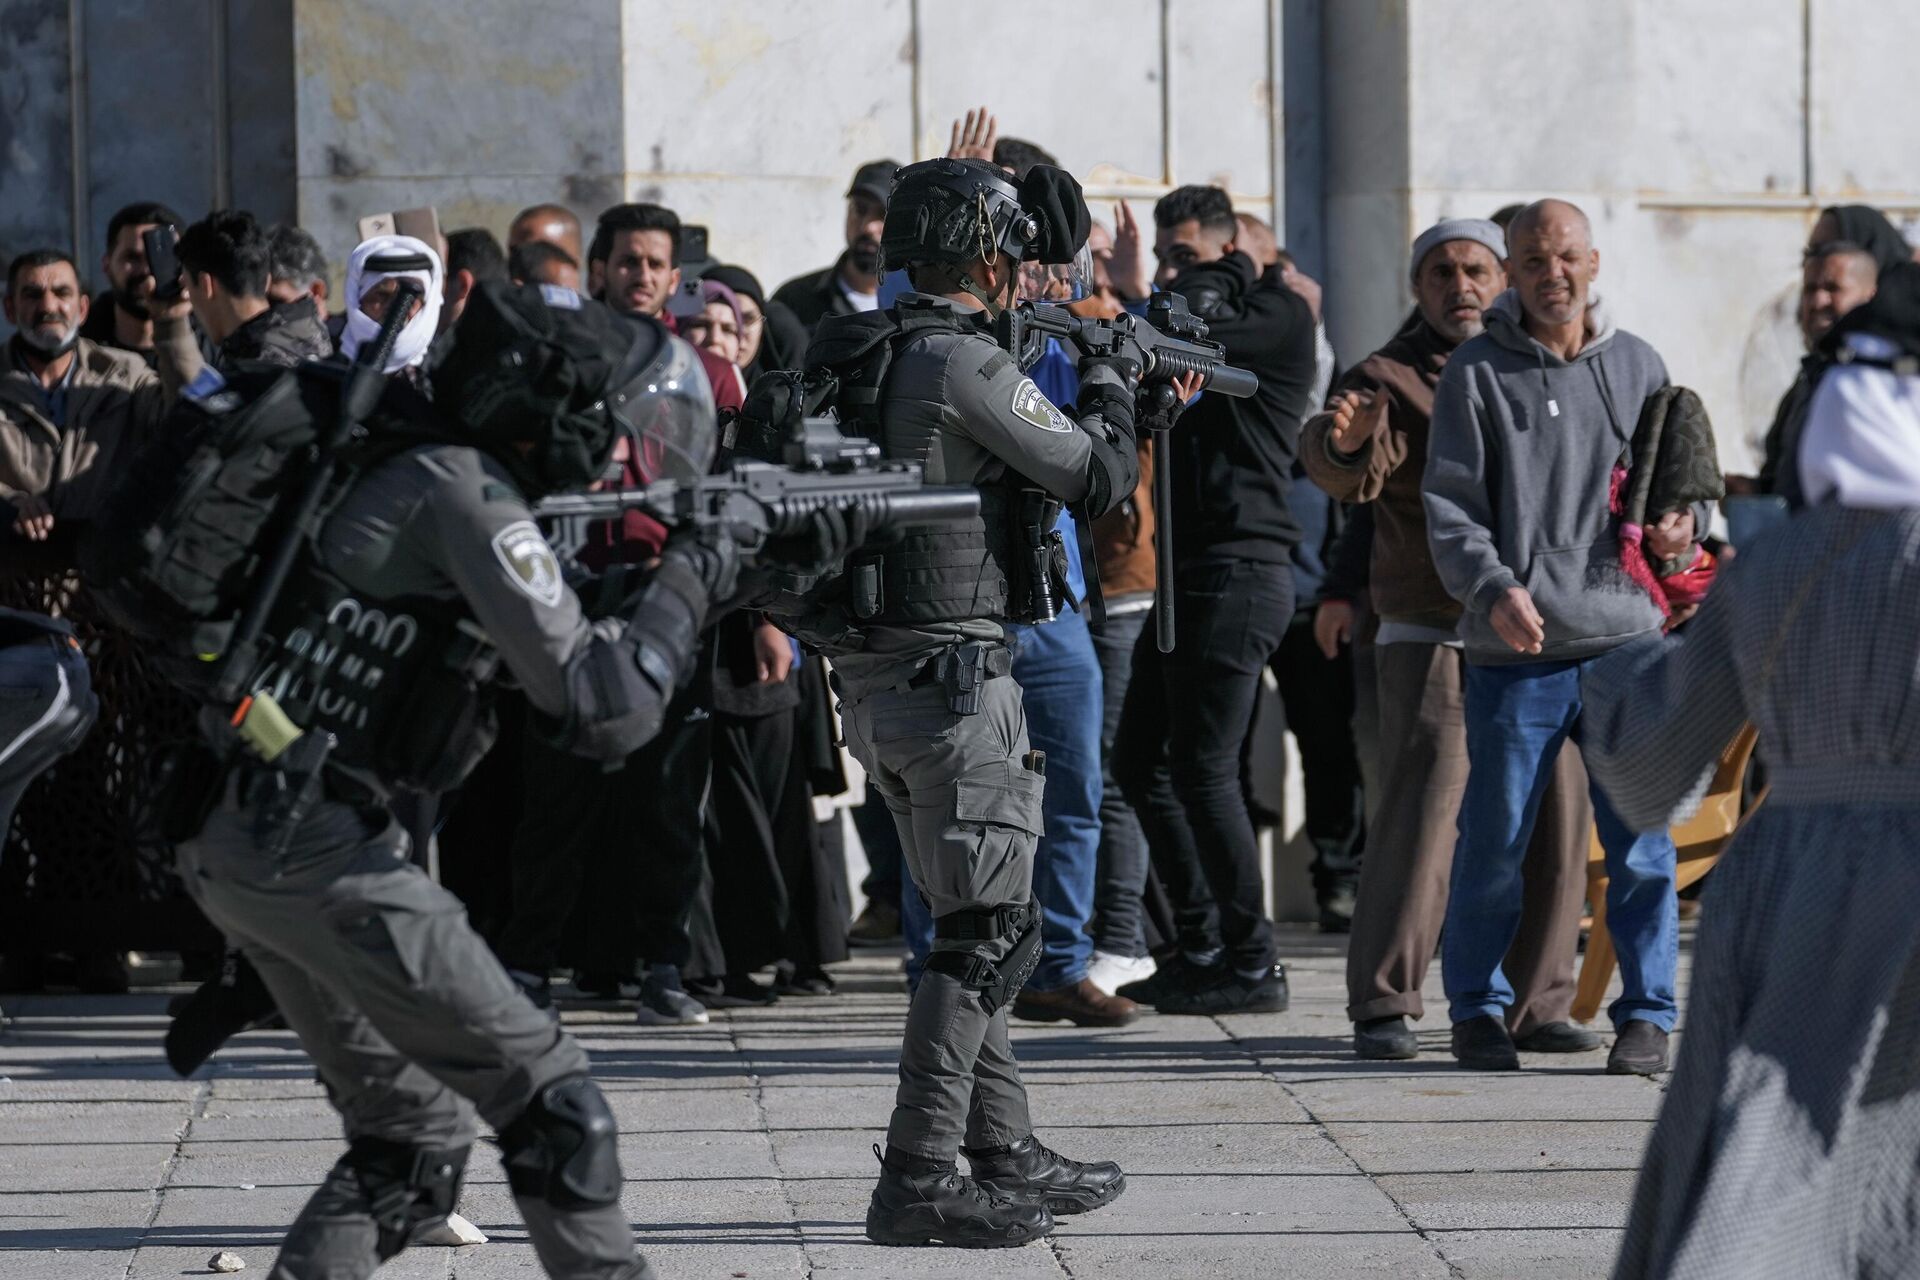 Israeli security forces take position during clashes with Palestinians demonstrators at the Al Aqsa Mosque compound in Jerusalem's Old City, Friday, April 15, 2022. - Sputnik International, 1920, 09.06.2022